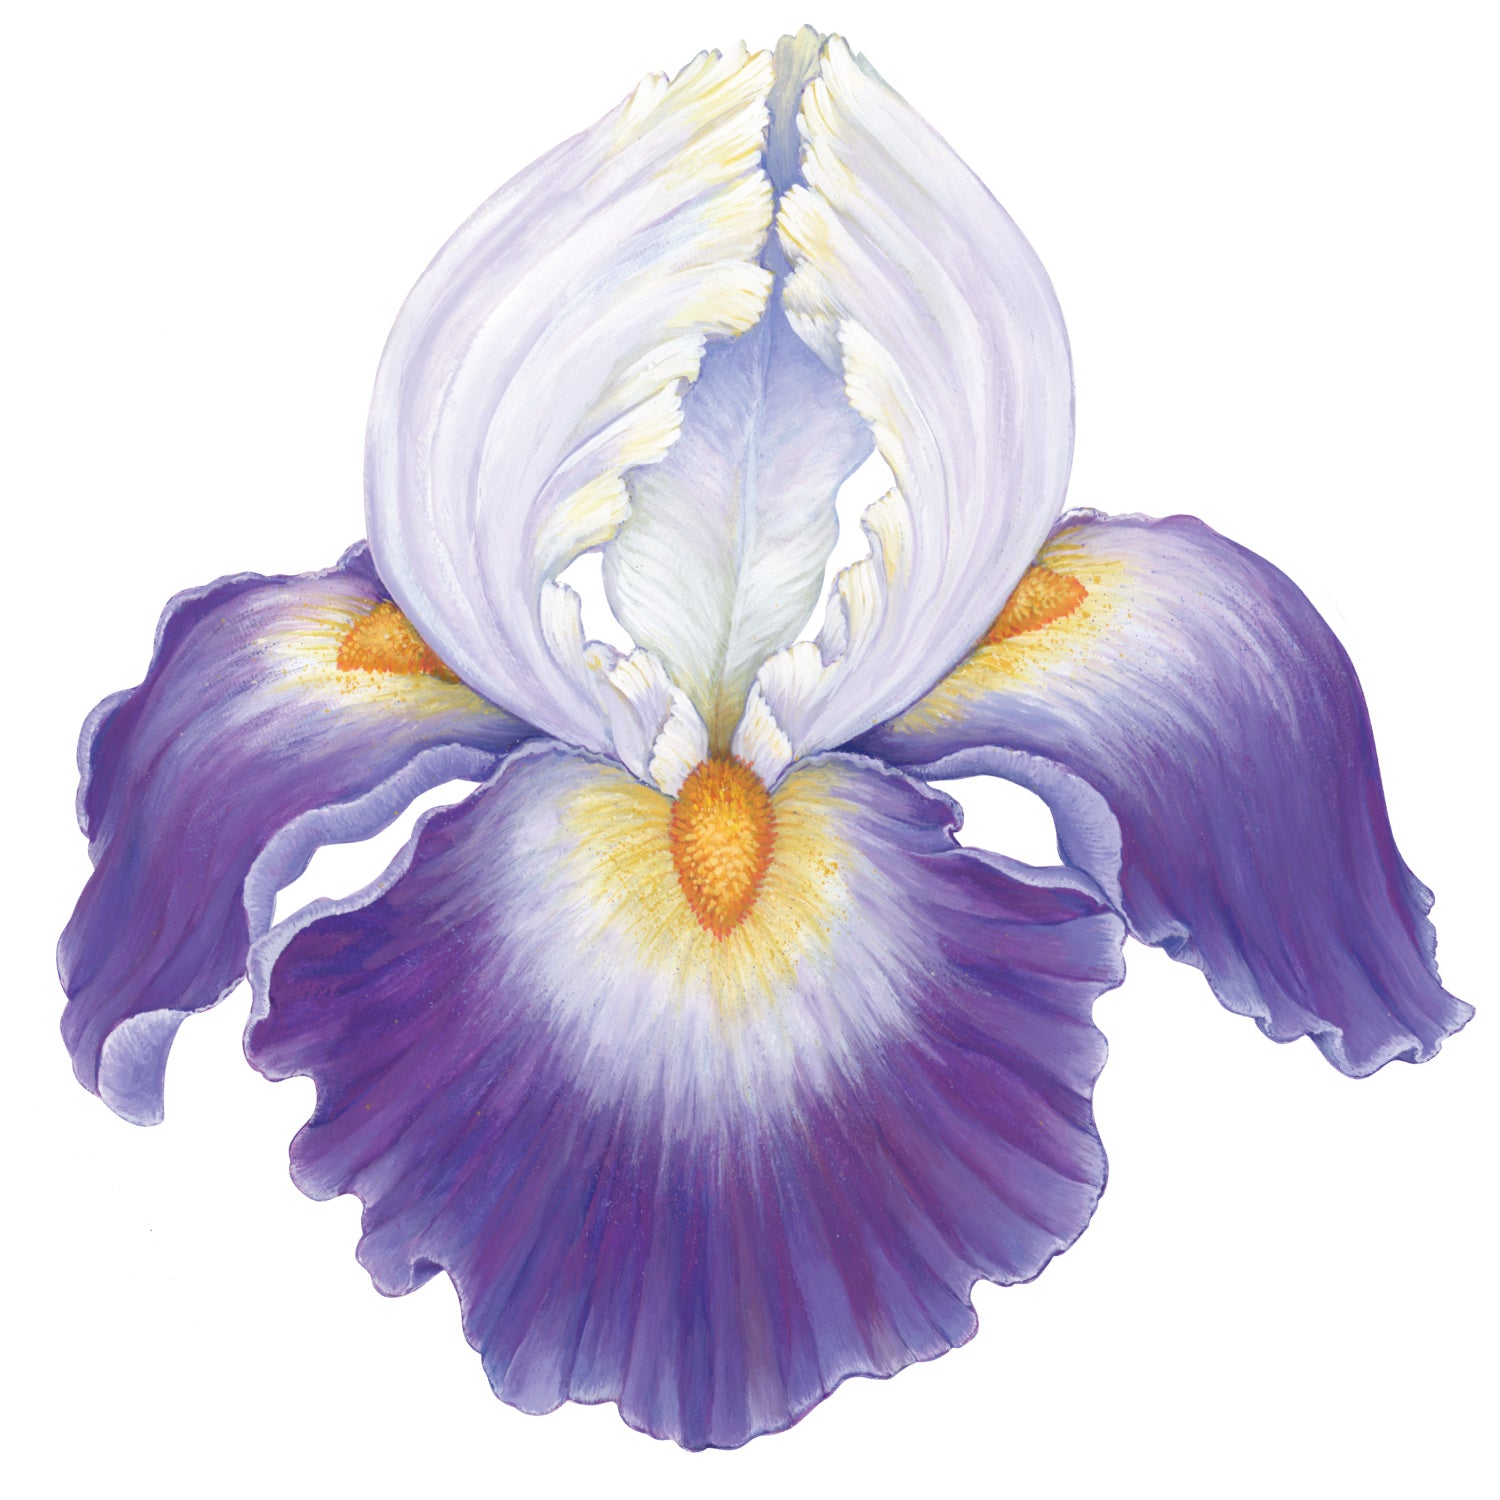 A die-cut illustrated iris bloom, in deep purple and white with a yellow center.